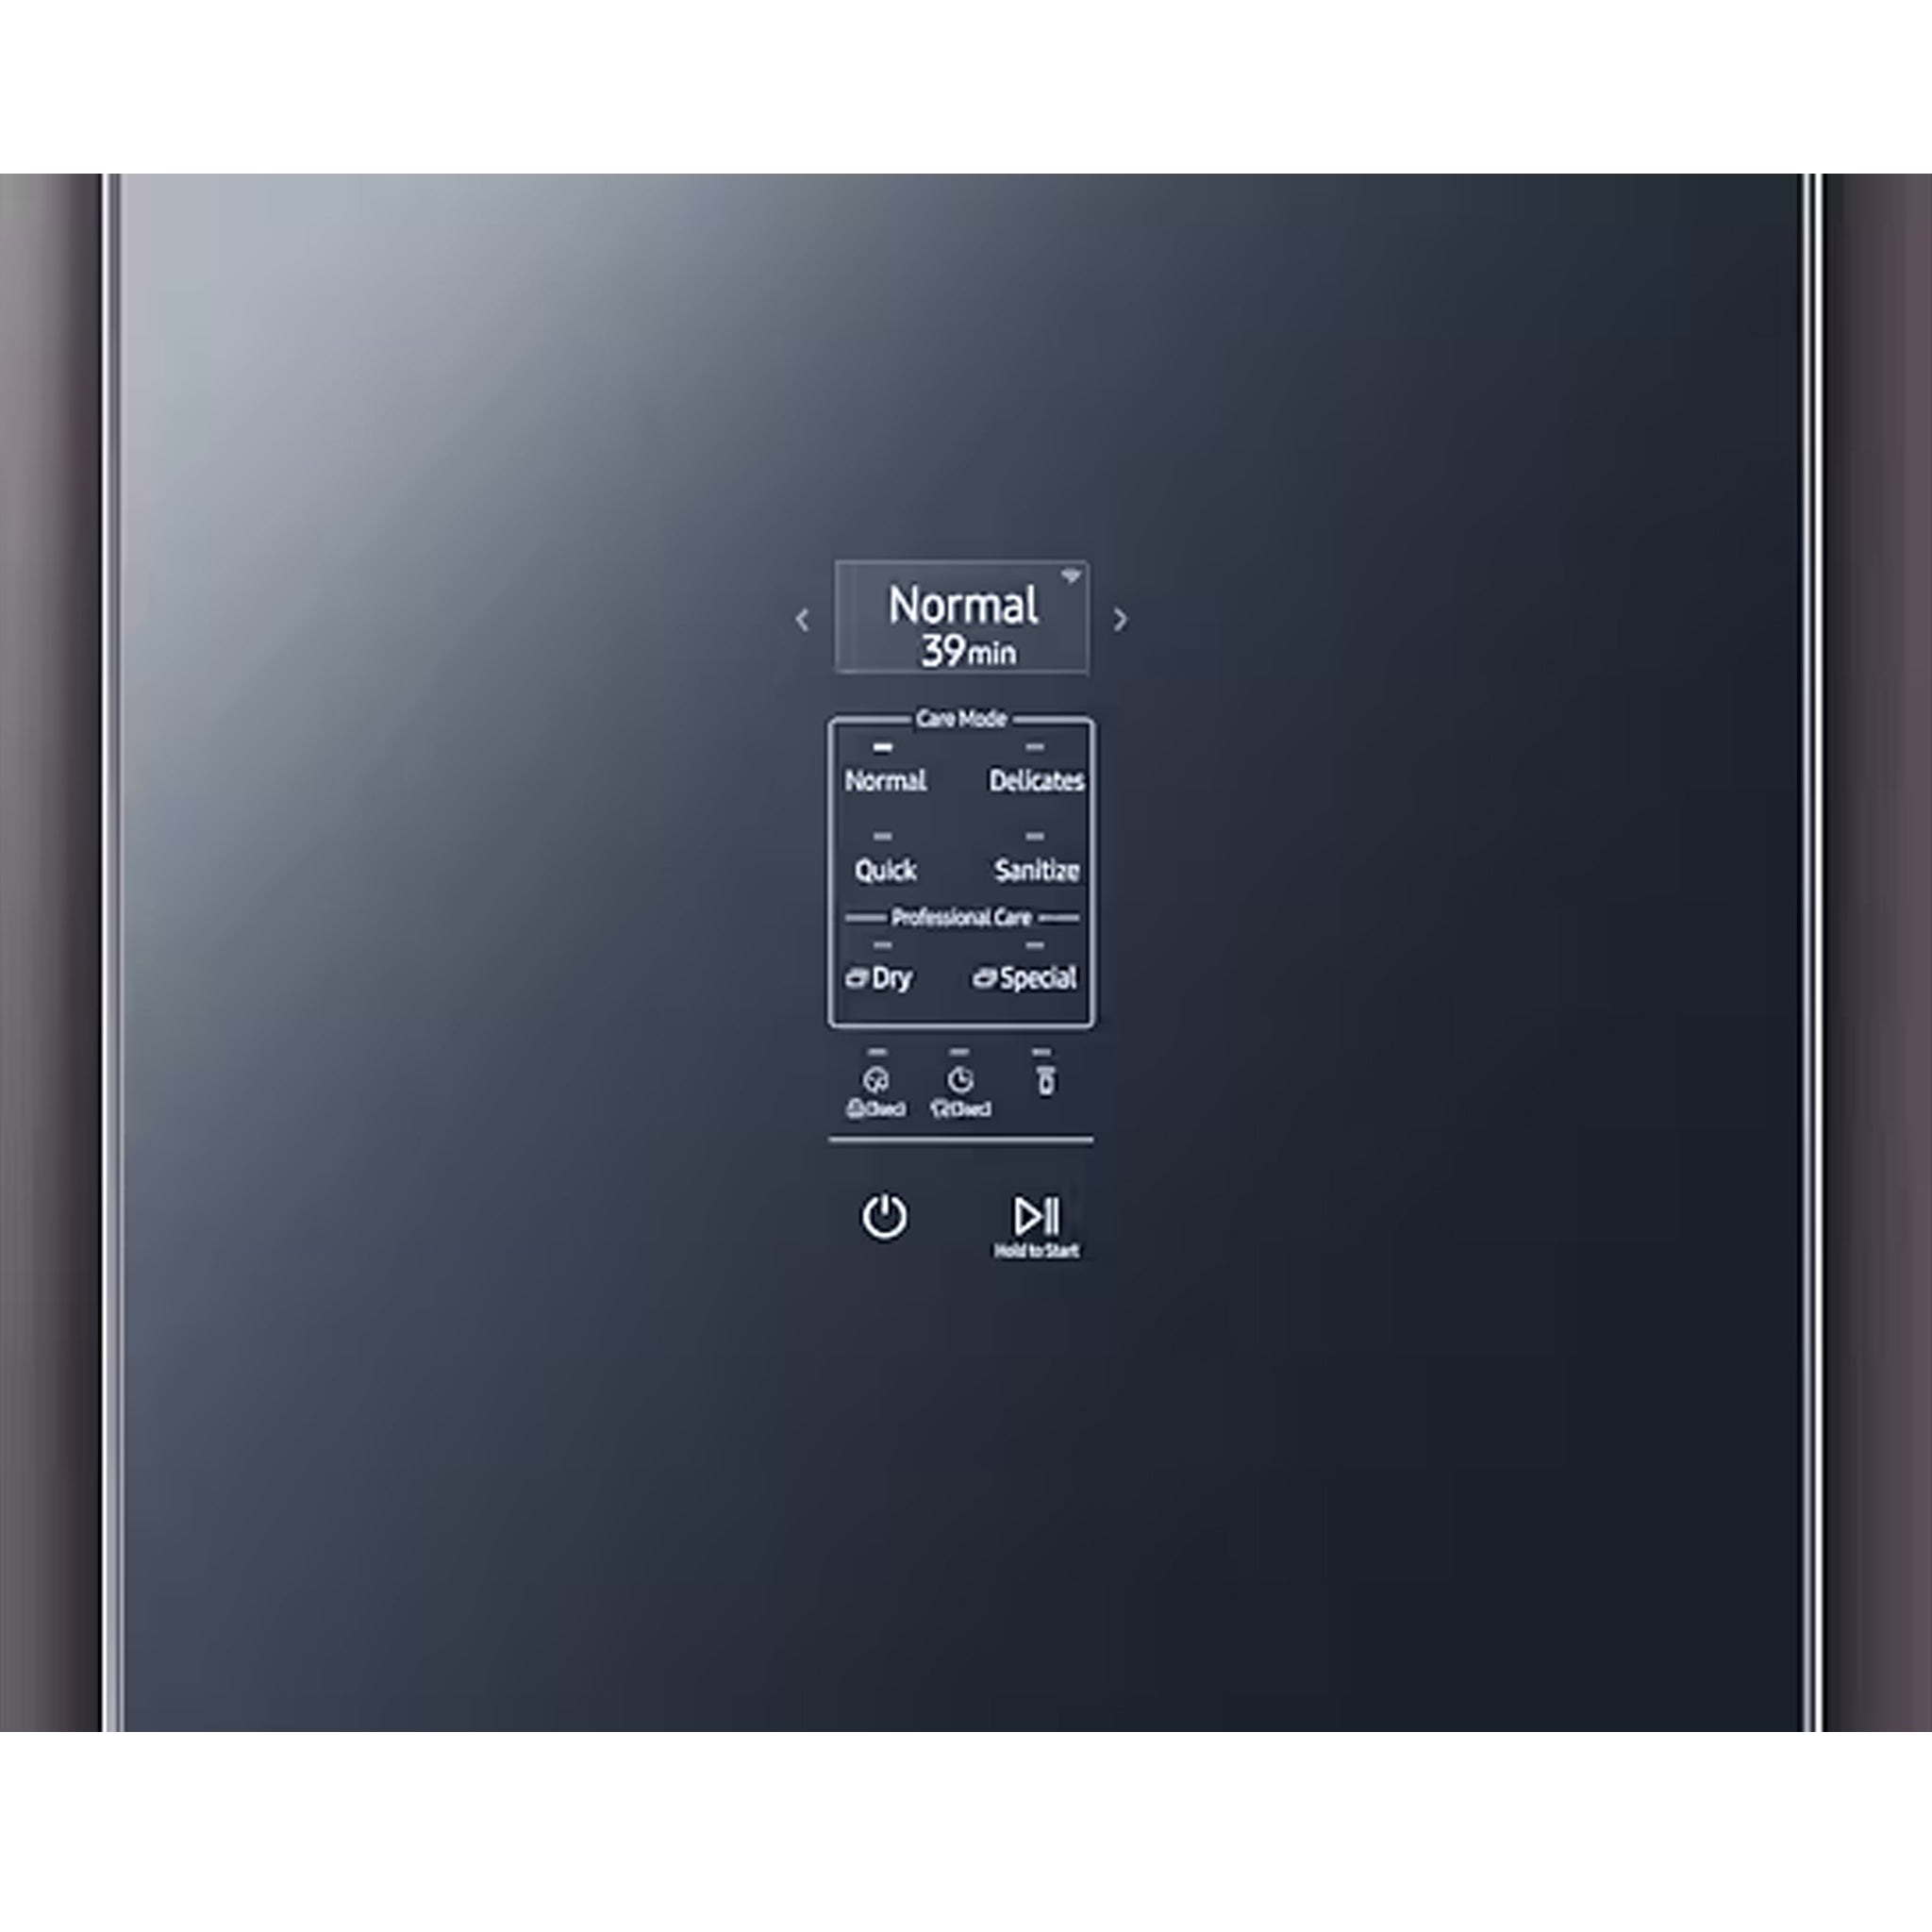 SAMSUNG DF60R8600CG AirDresser with steam for sanitizing clothes Fabric Care Machine Samsung